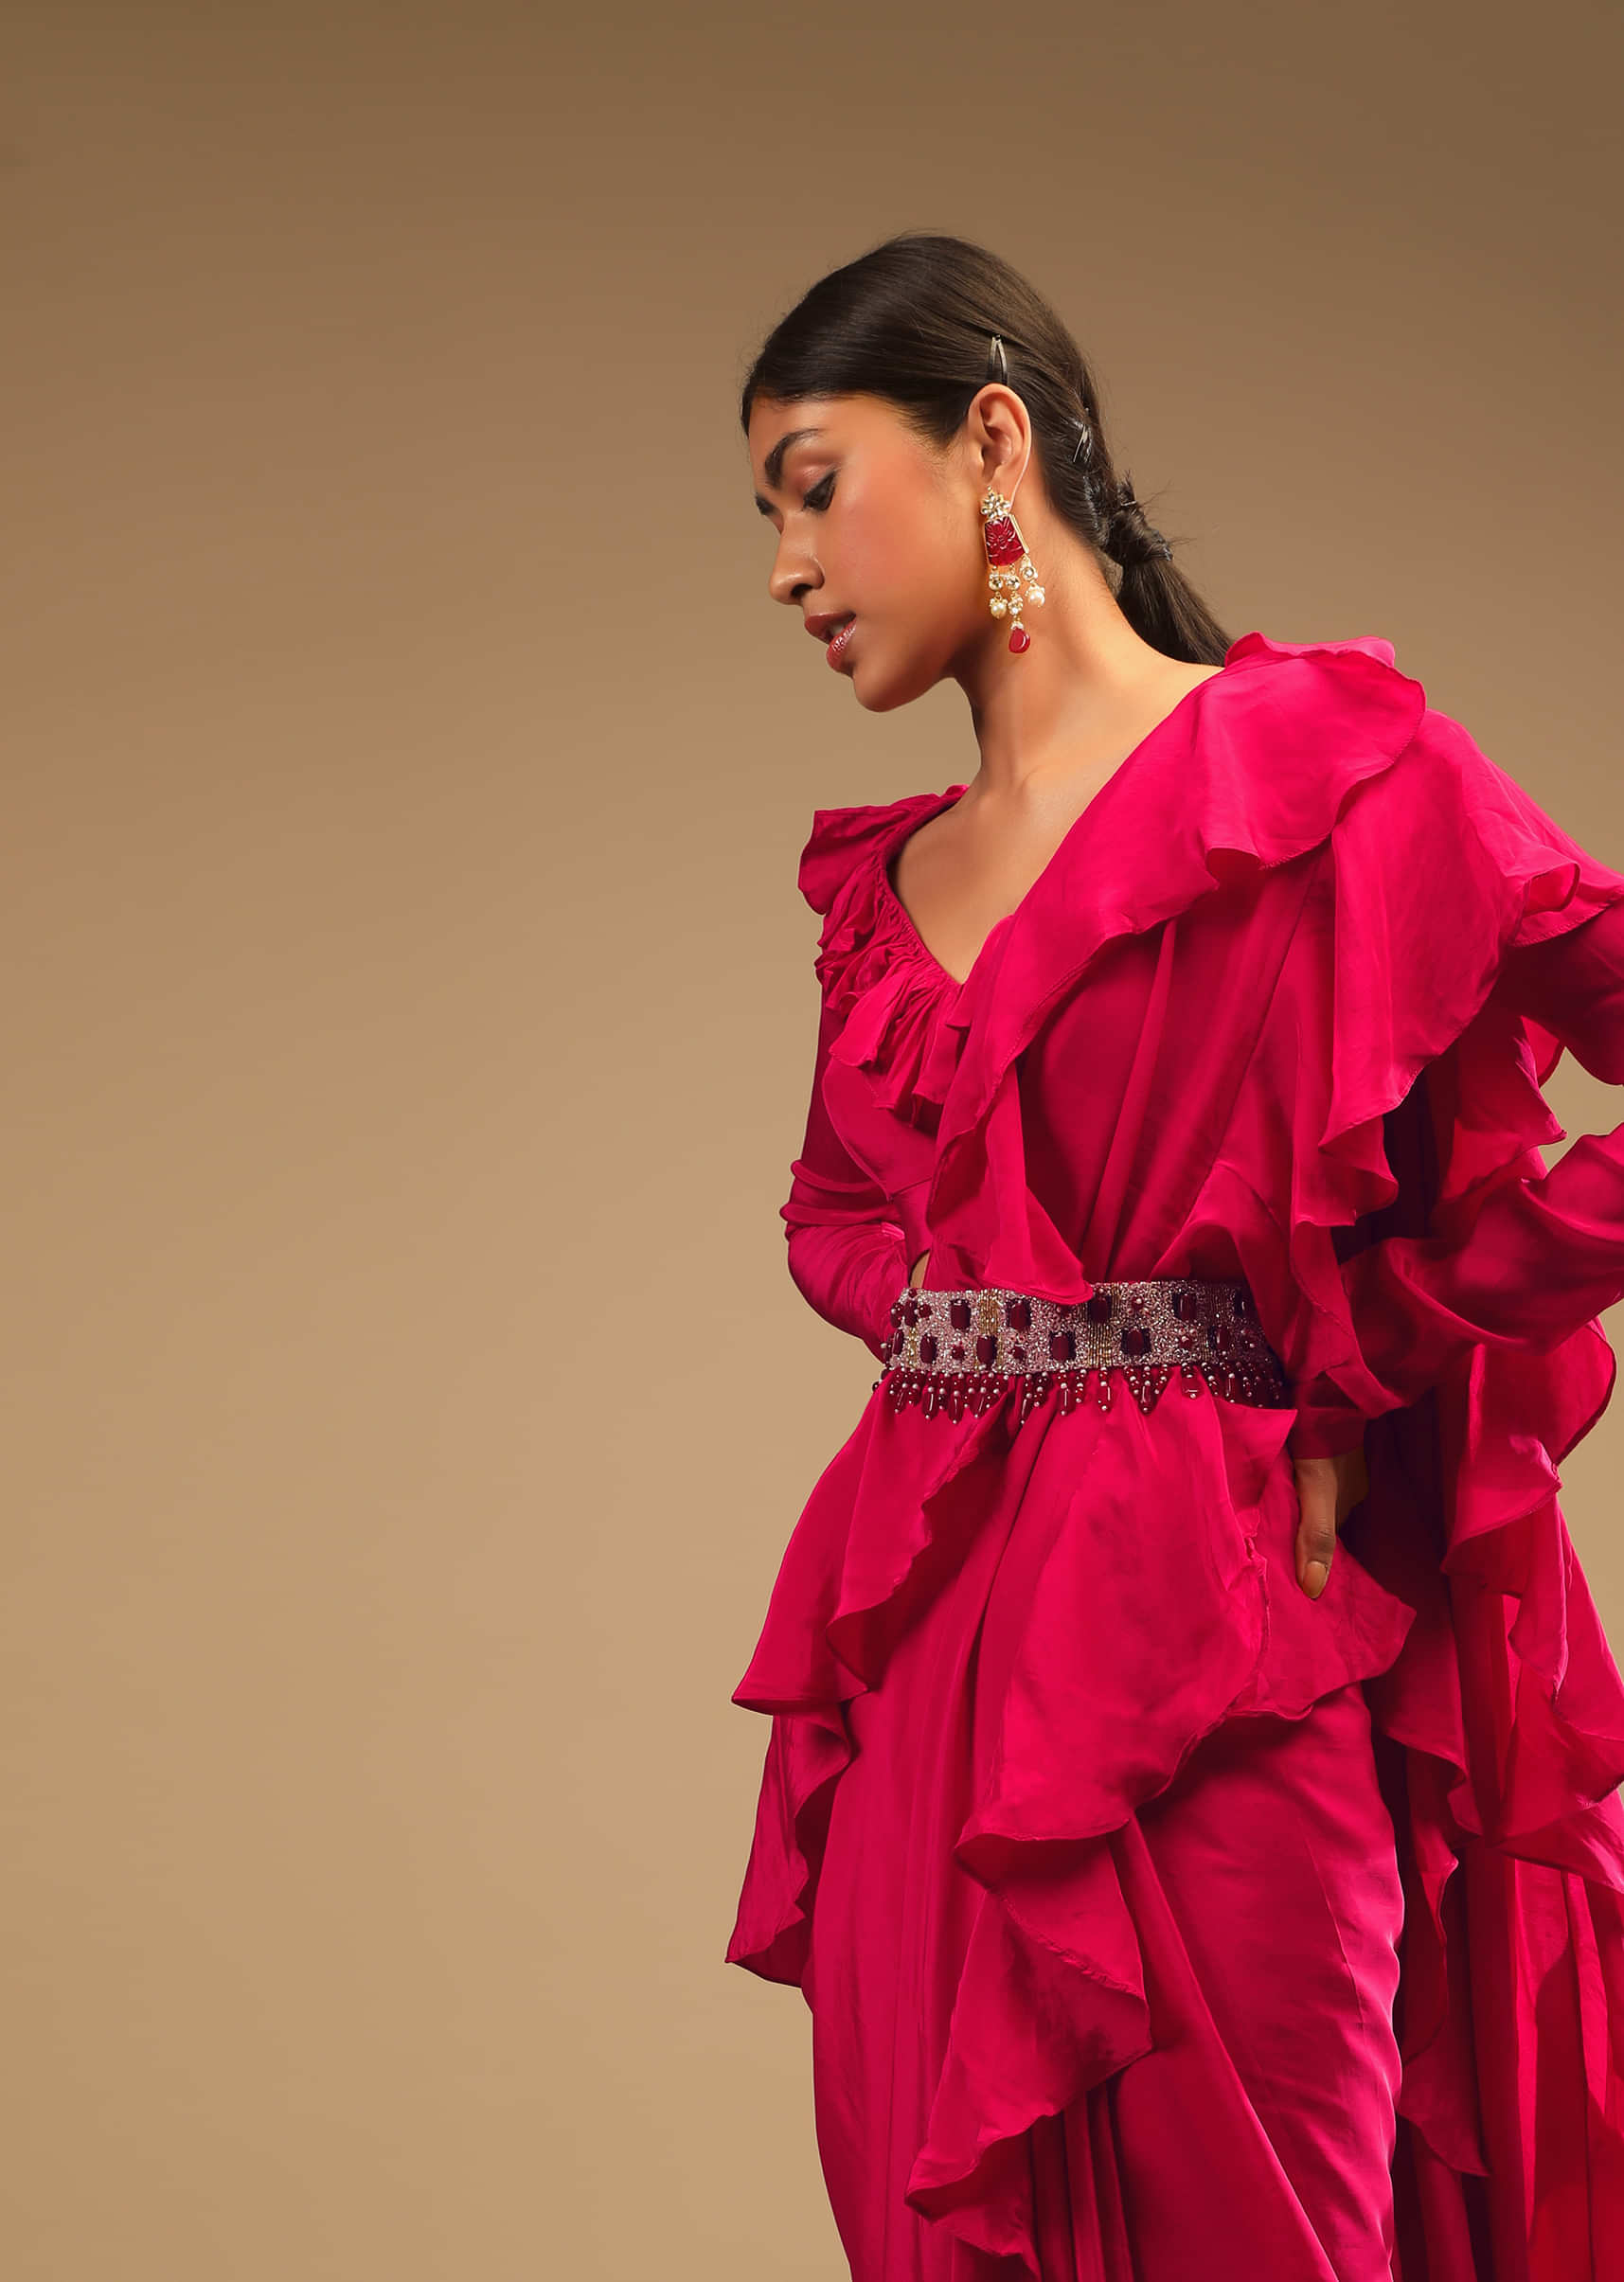 Hot Pink Saree With Ruffle Pallu, Stone Embellished Belt And A Ruffle Blouse With Side Cut Outs  